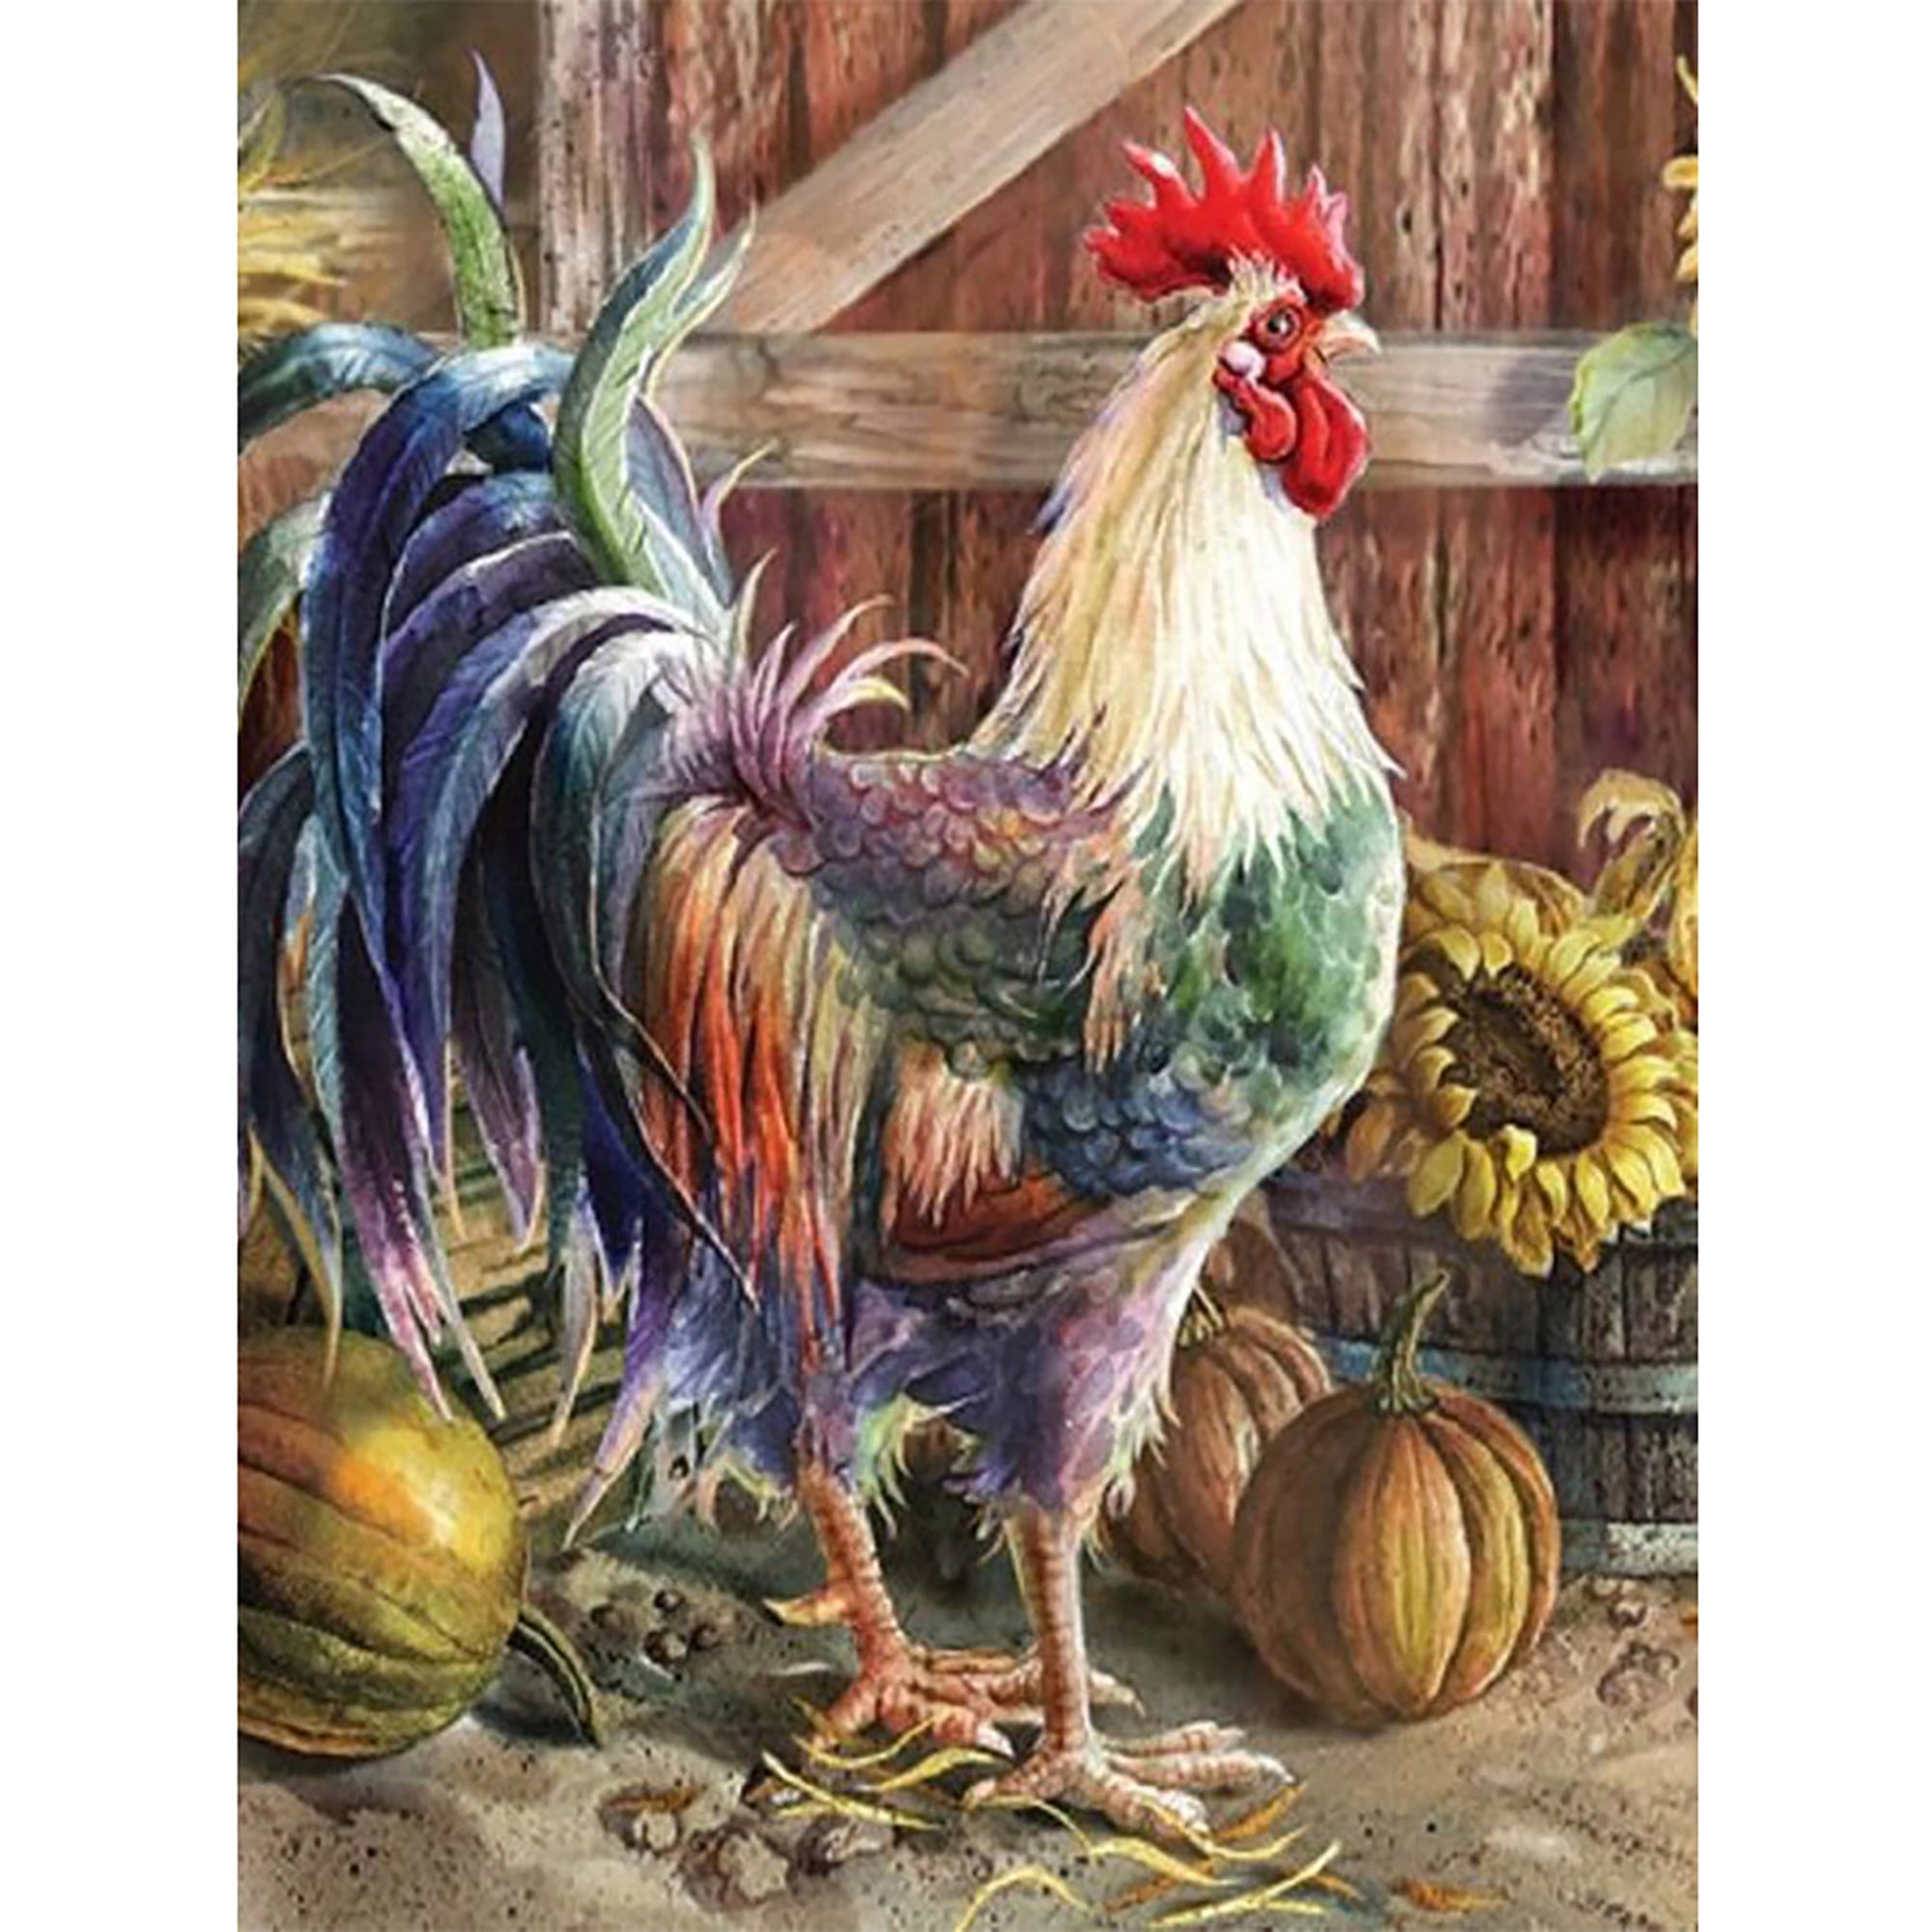 YouCY Chicken 5D DIY Diamond Painting Cock Animal Cross Stitch Crafts Decor Gifts for Adults Office Home Bedroom Decoration 